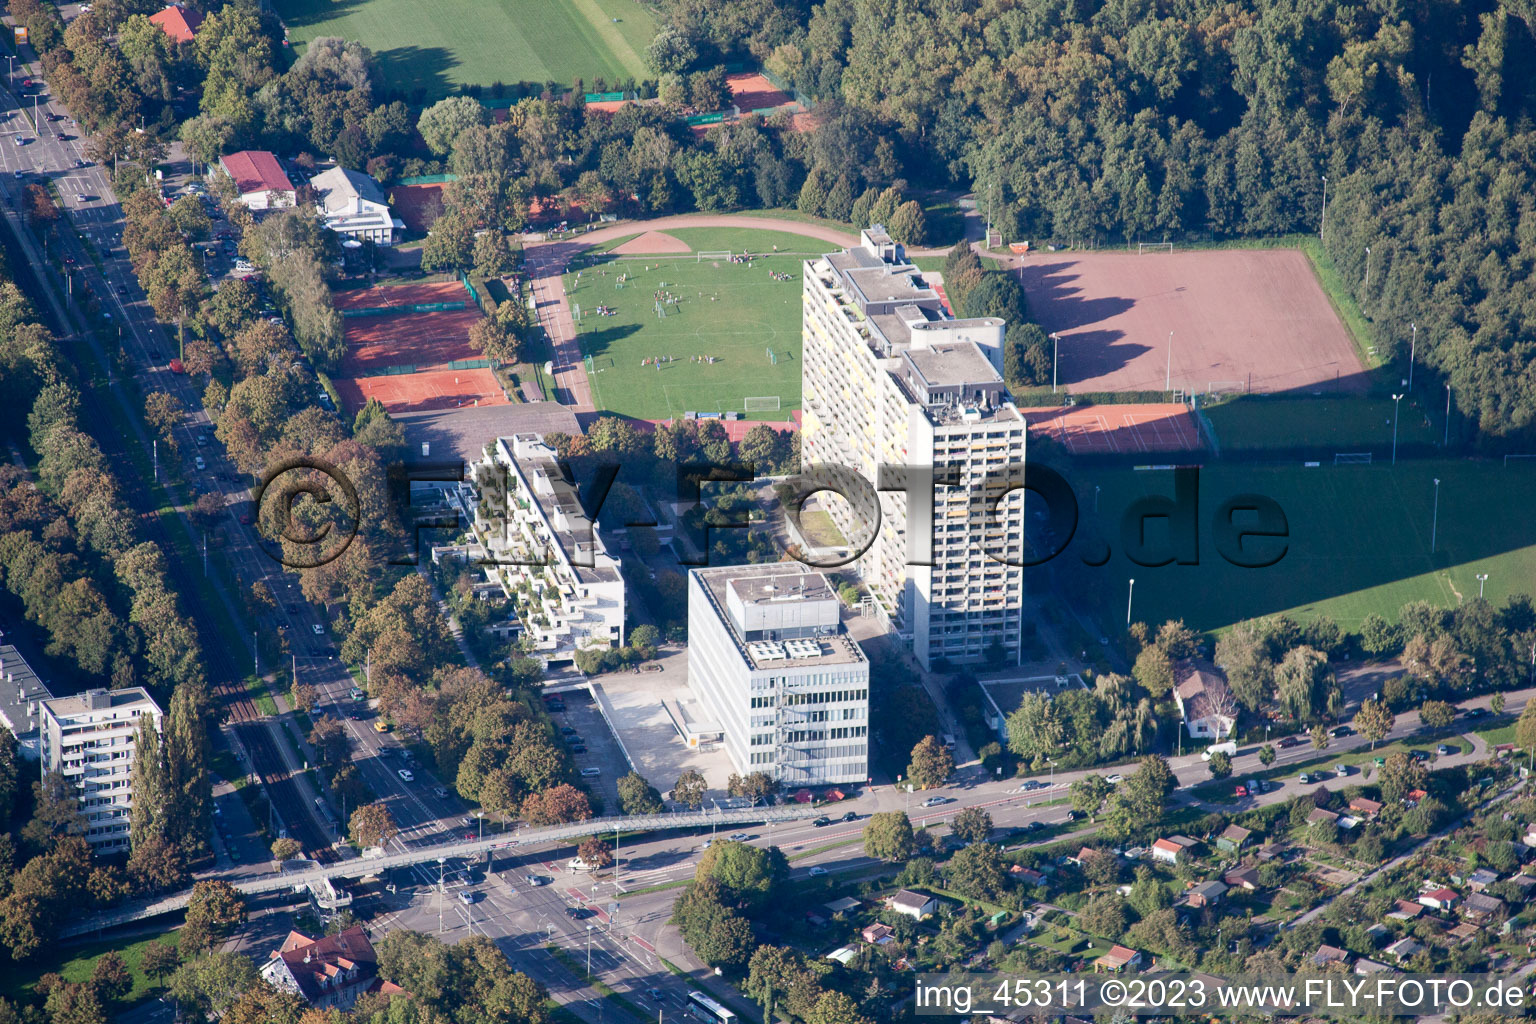 District Weiherfeld-Dammerstock in Karlsruhe in the state Baden-Wuerttemberg, Germany seen from above